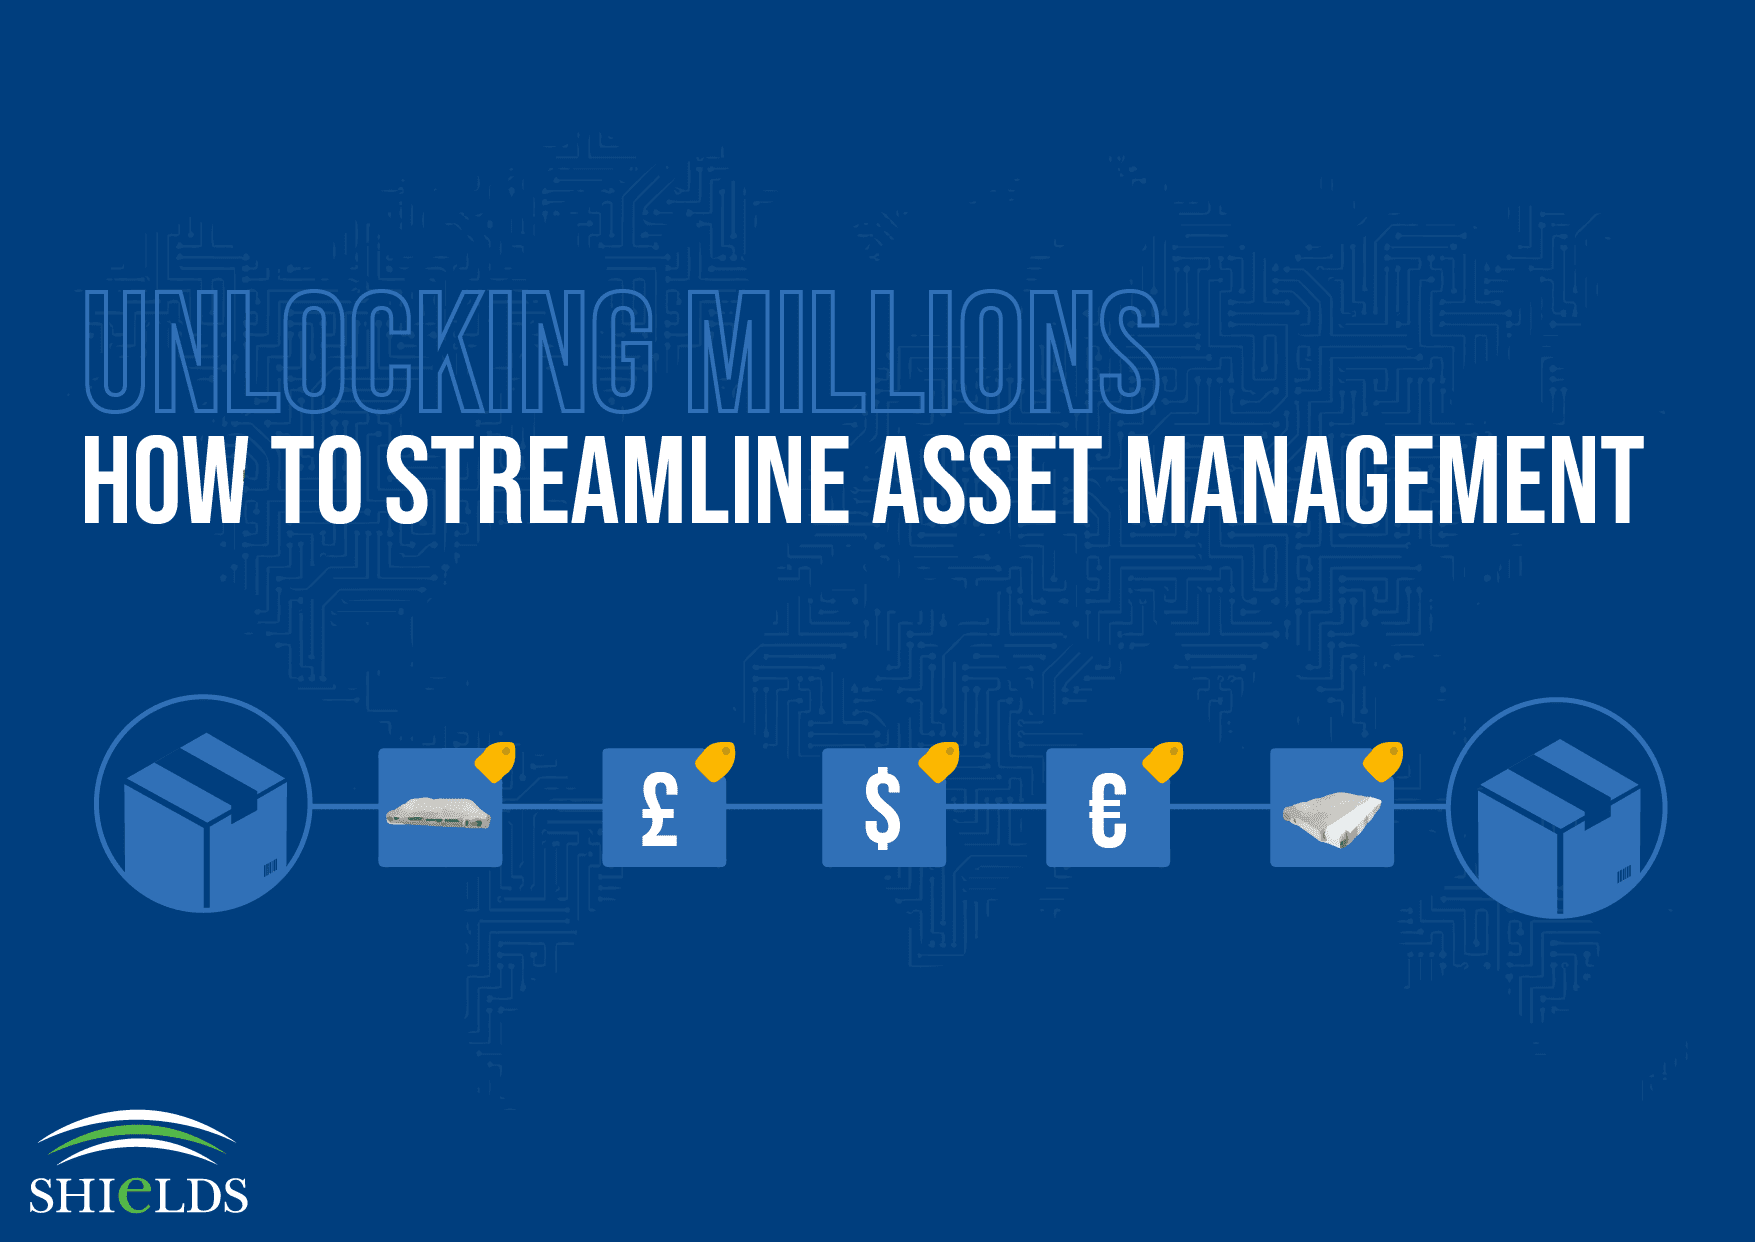 Unlocking millions: how to streamline asset management (and transform your network’s obsolete assets into unrestrained revenues) Blog header Graphic